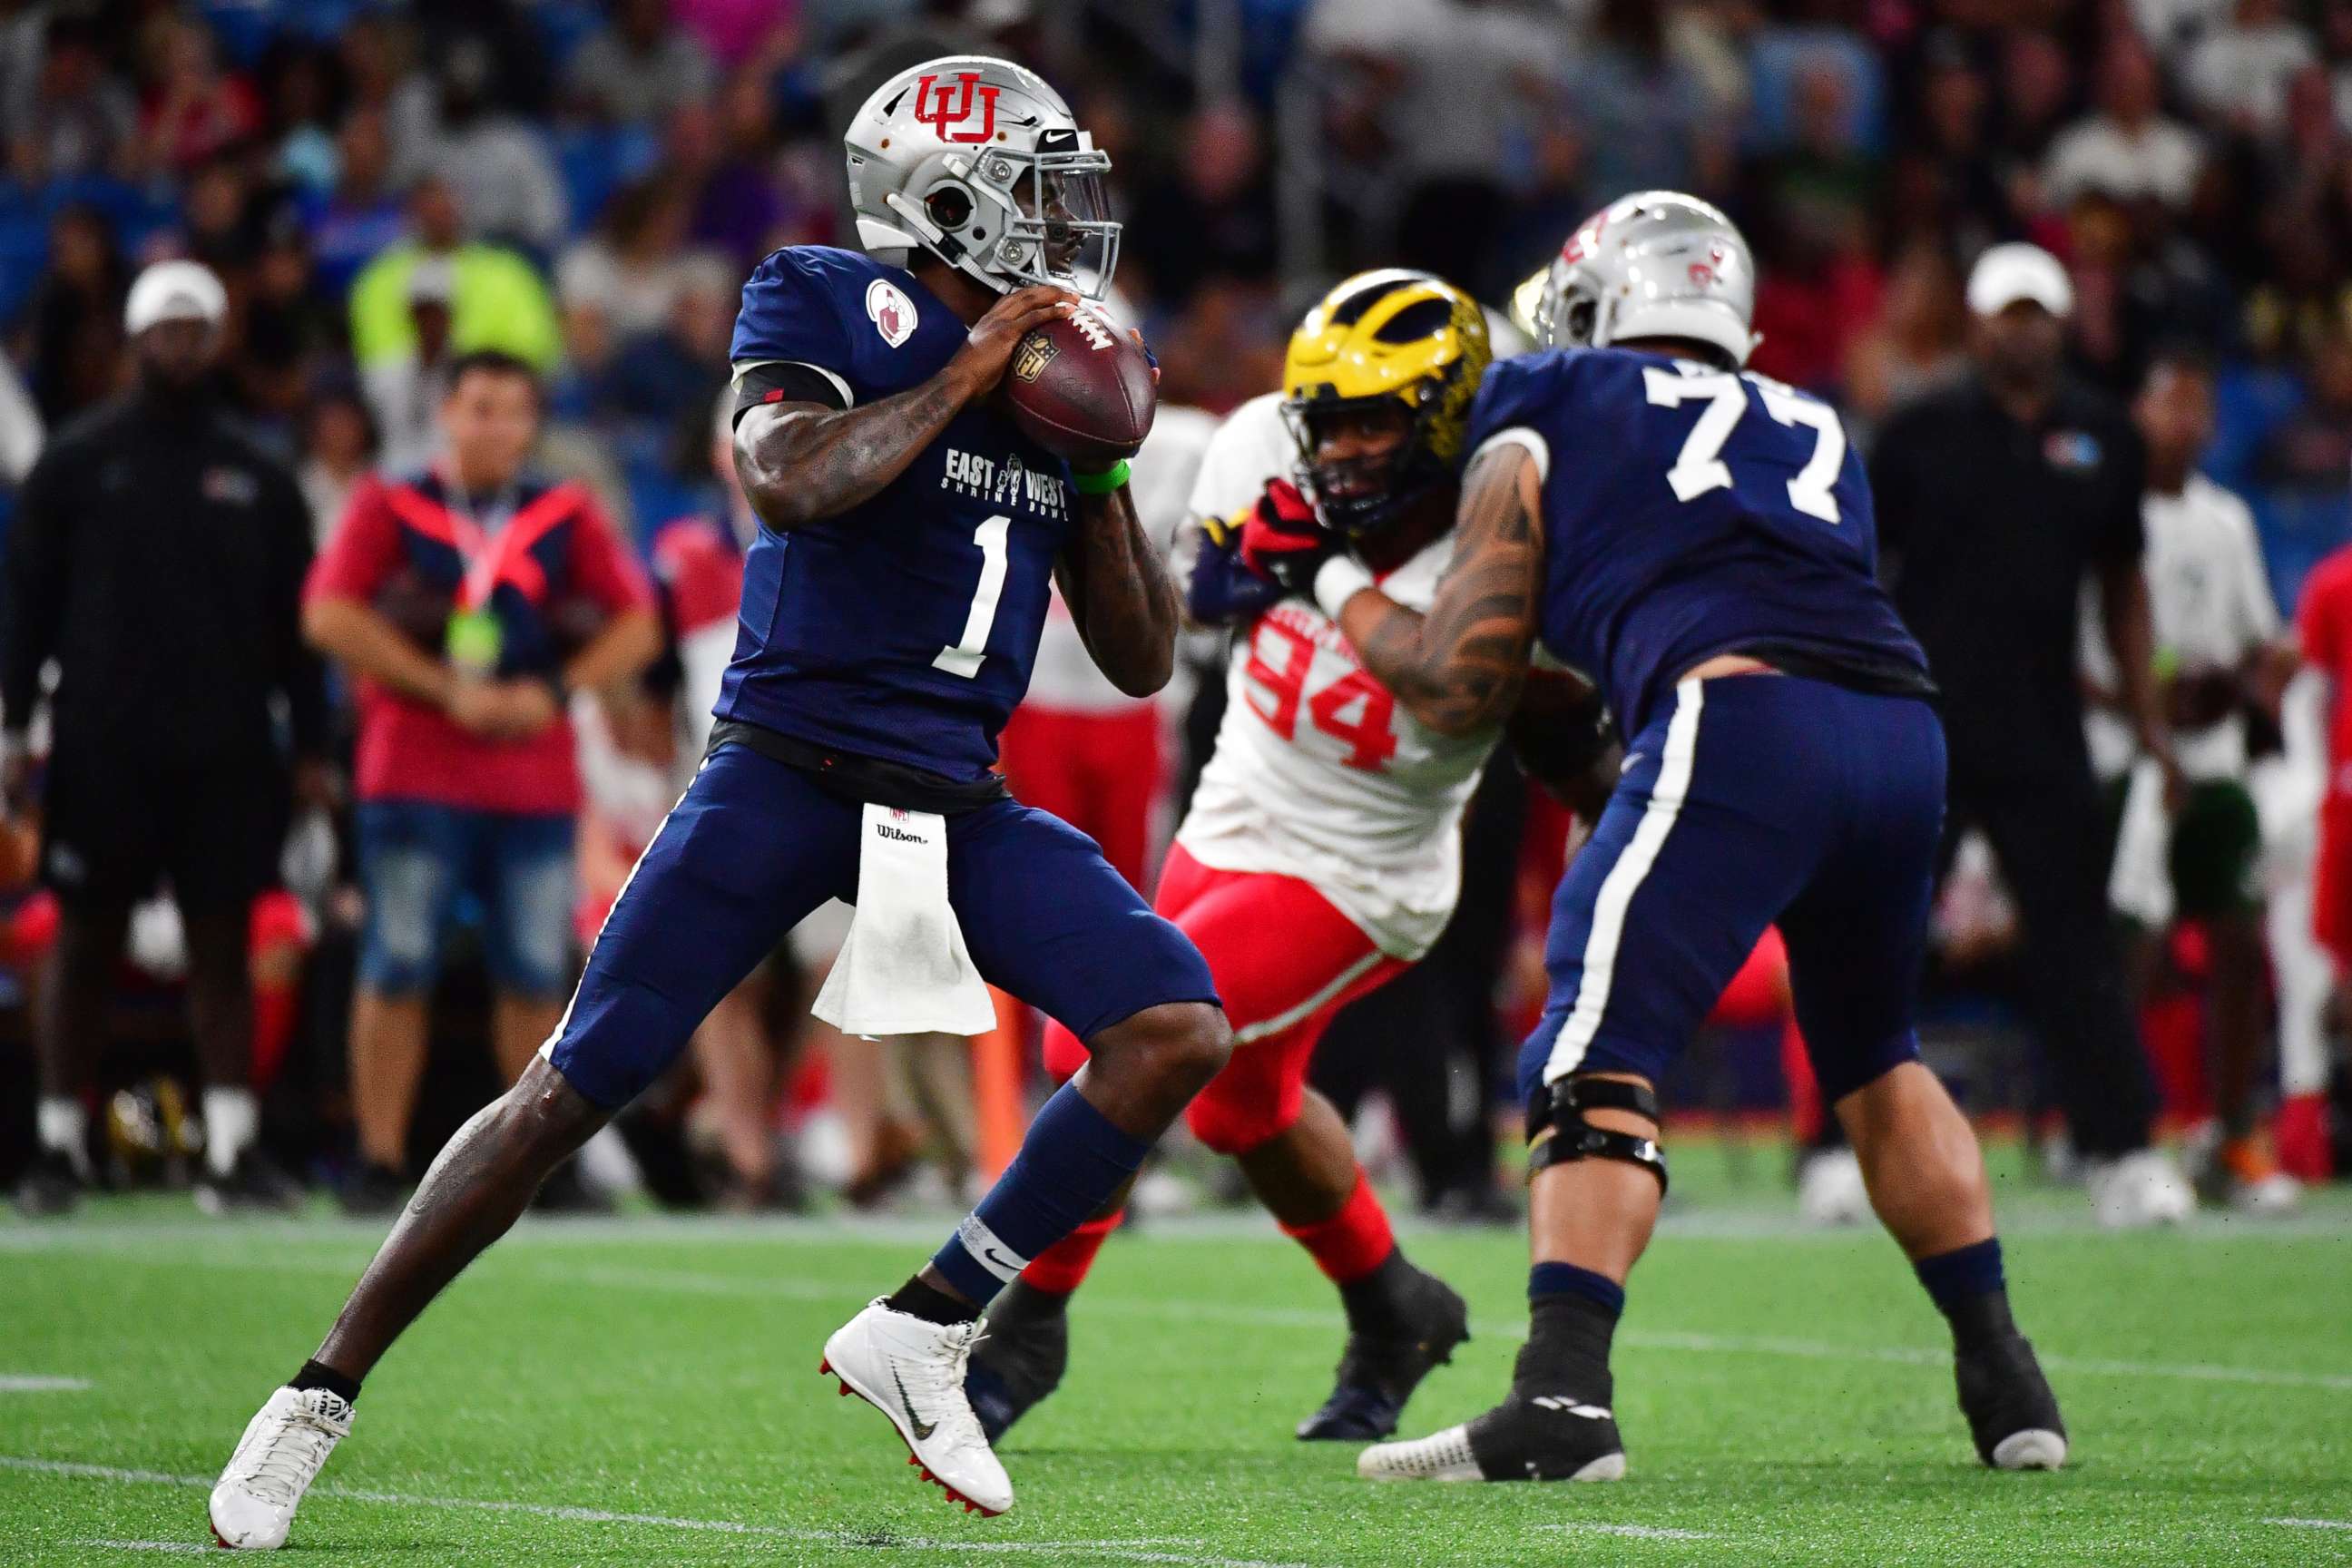 PHOTO: Tyler Huntley from Utah playing for the West Team during the third quarter against the East Team at the 2020 East West Shrine Bowl at Tropicana Field on Jan. 18, 2020, in St Petersburg, Fla.